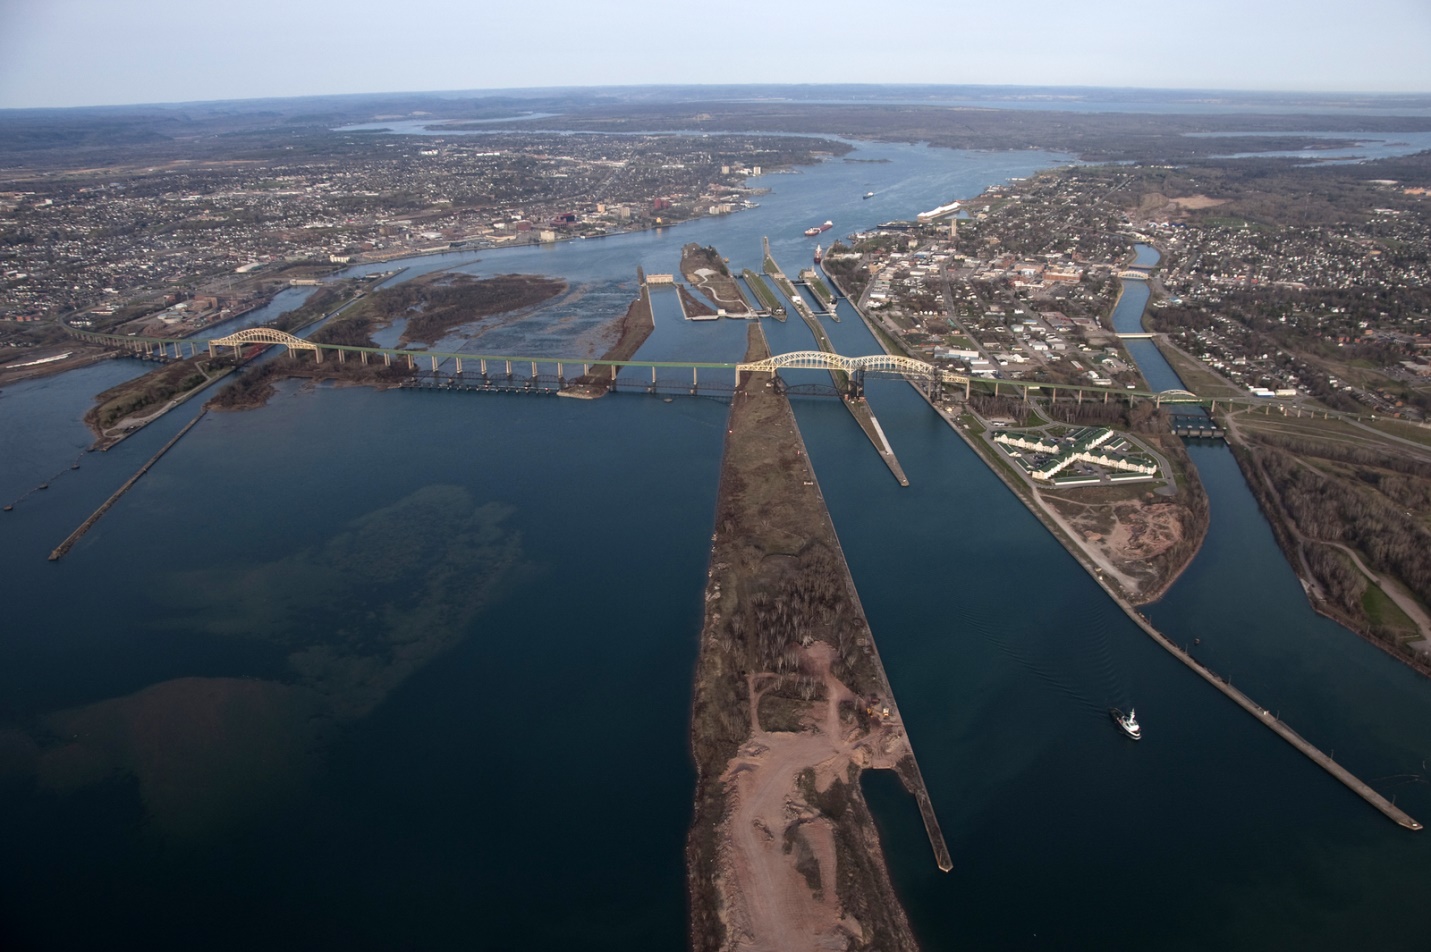 An aerial view showing the St. Marys River control structures. Credit: U.S. Army Corps of Engineers.